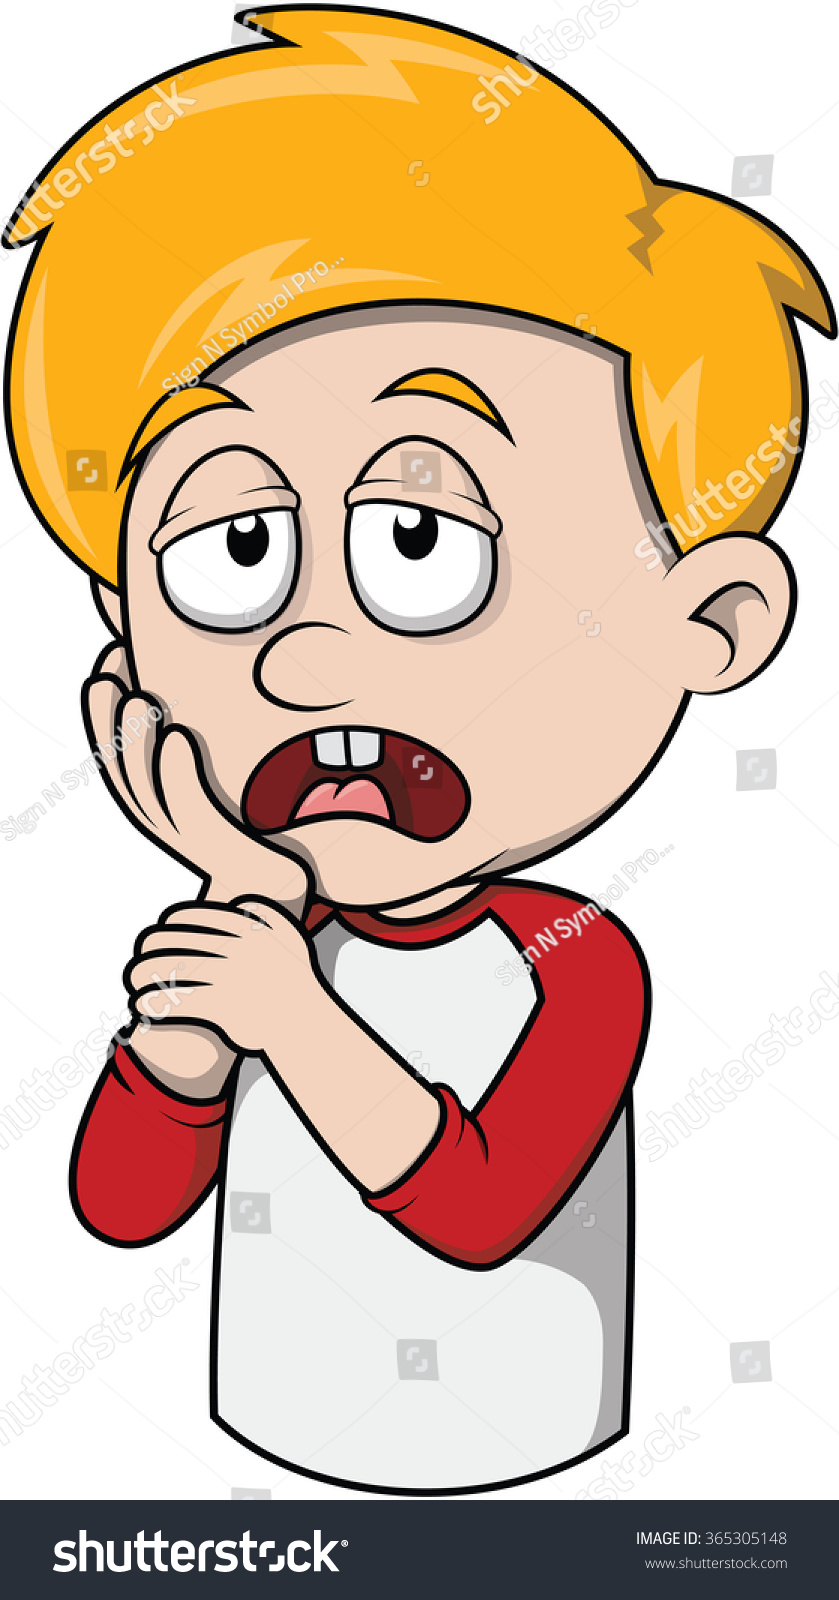 clipart toothache - photo #14